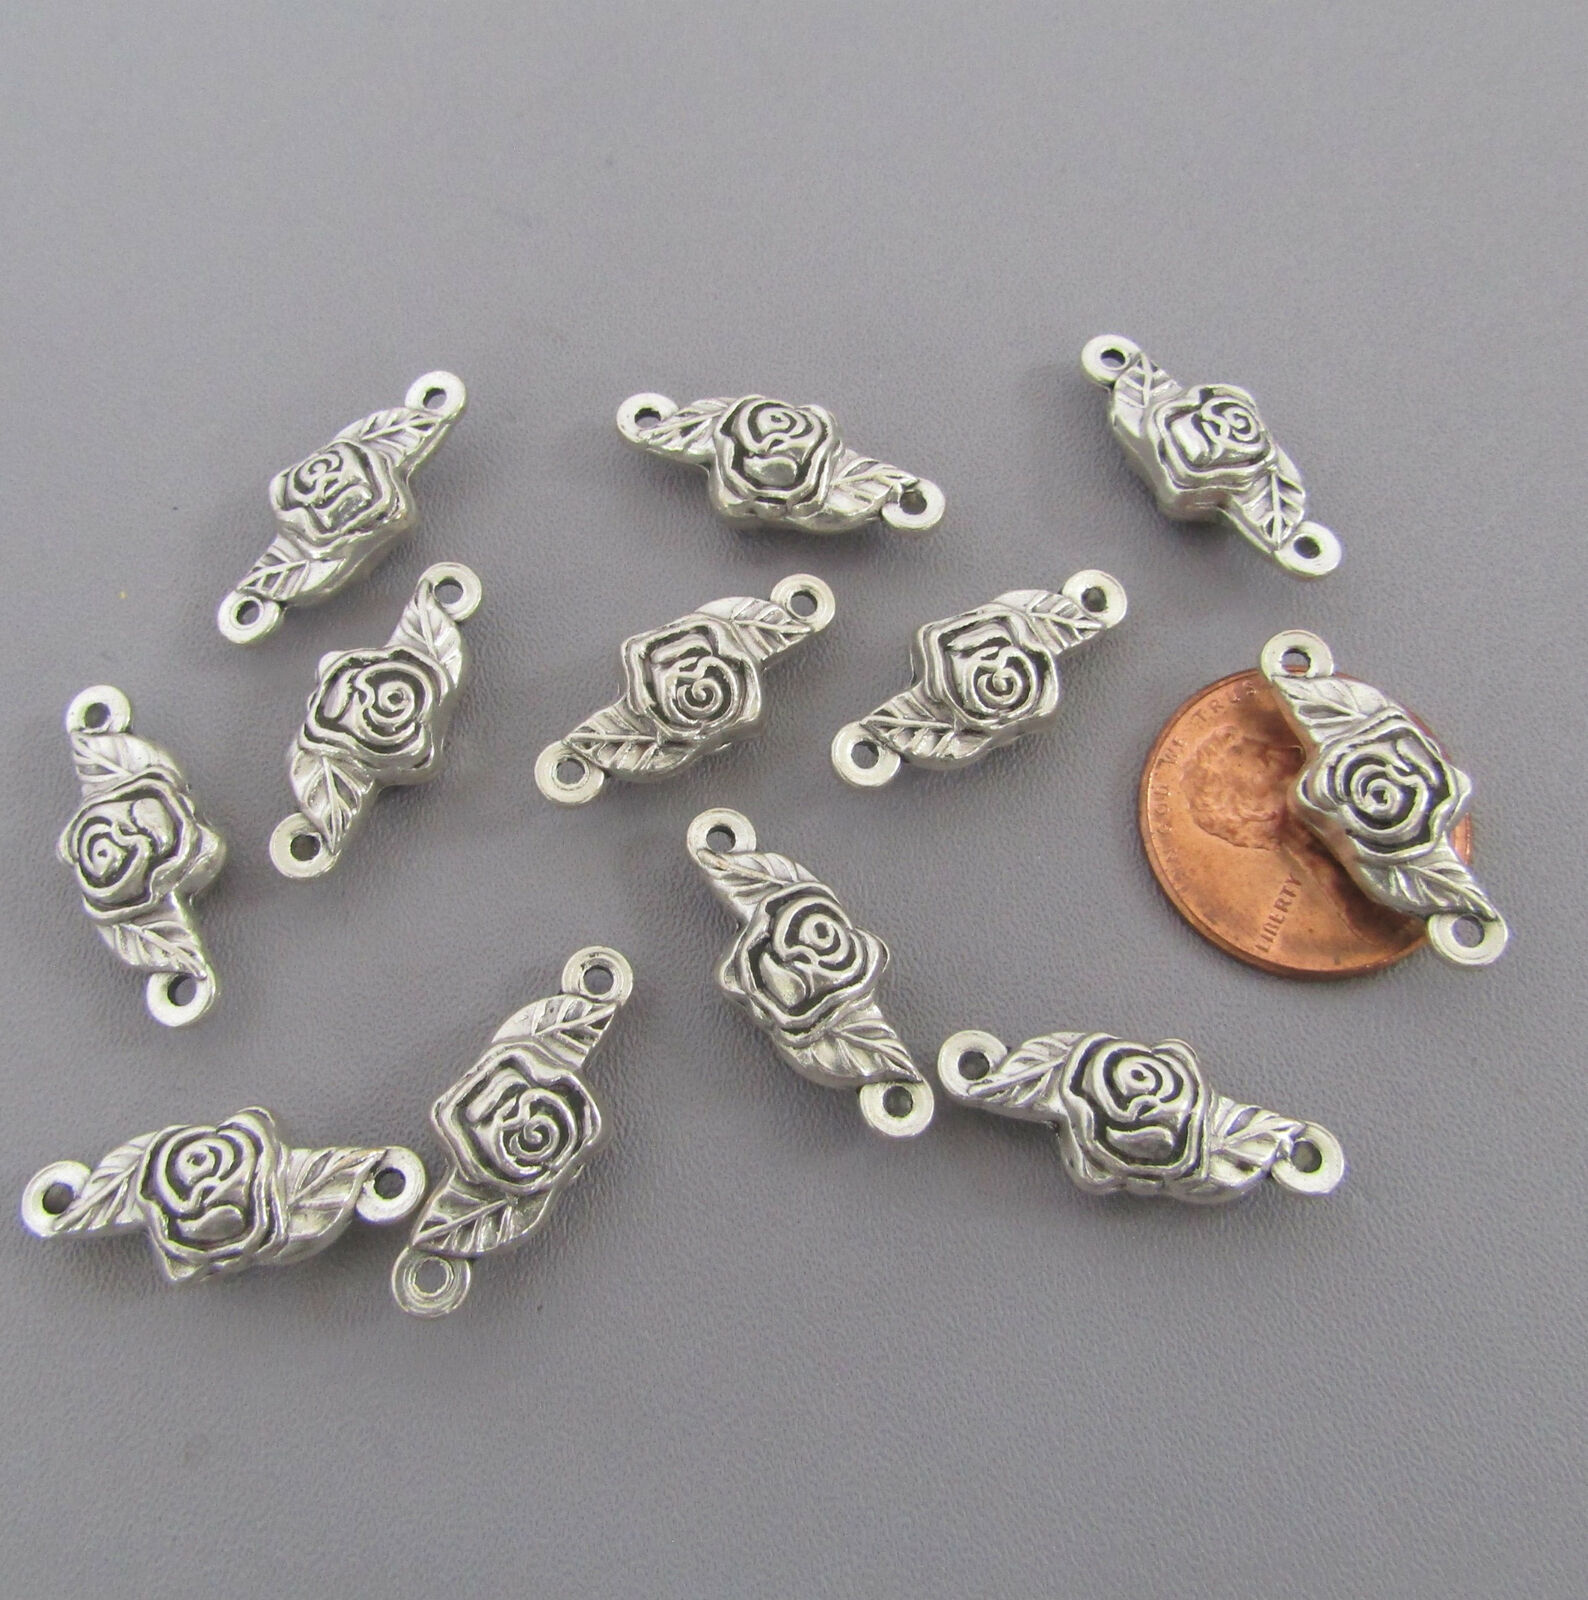 12 LARGE Rose OUR FATHER Beads ITALY Paters Rosary Rosaries F103 finish SILVER